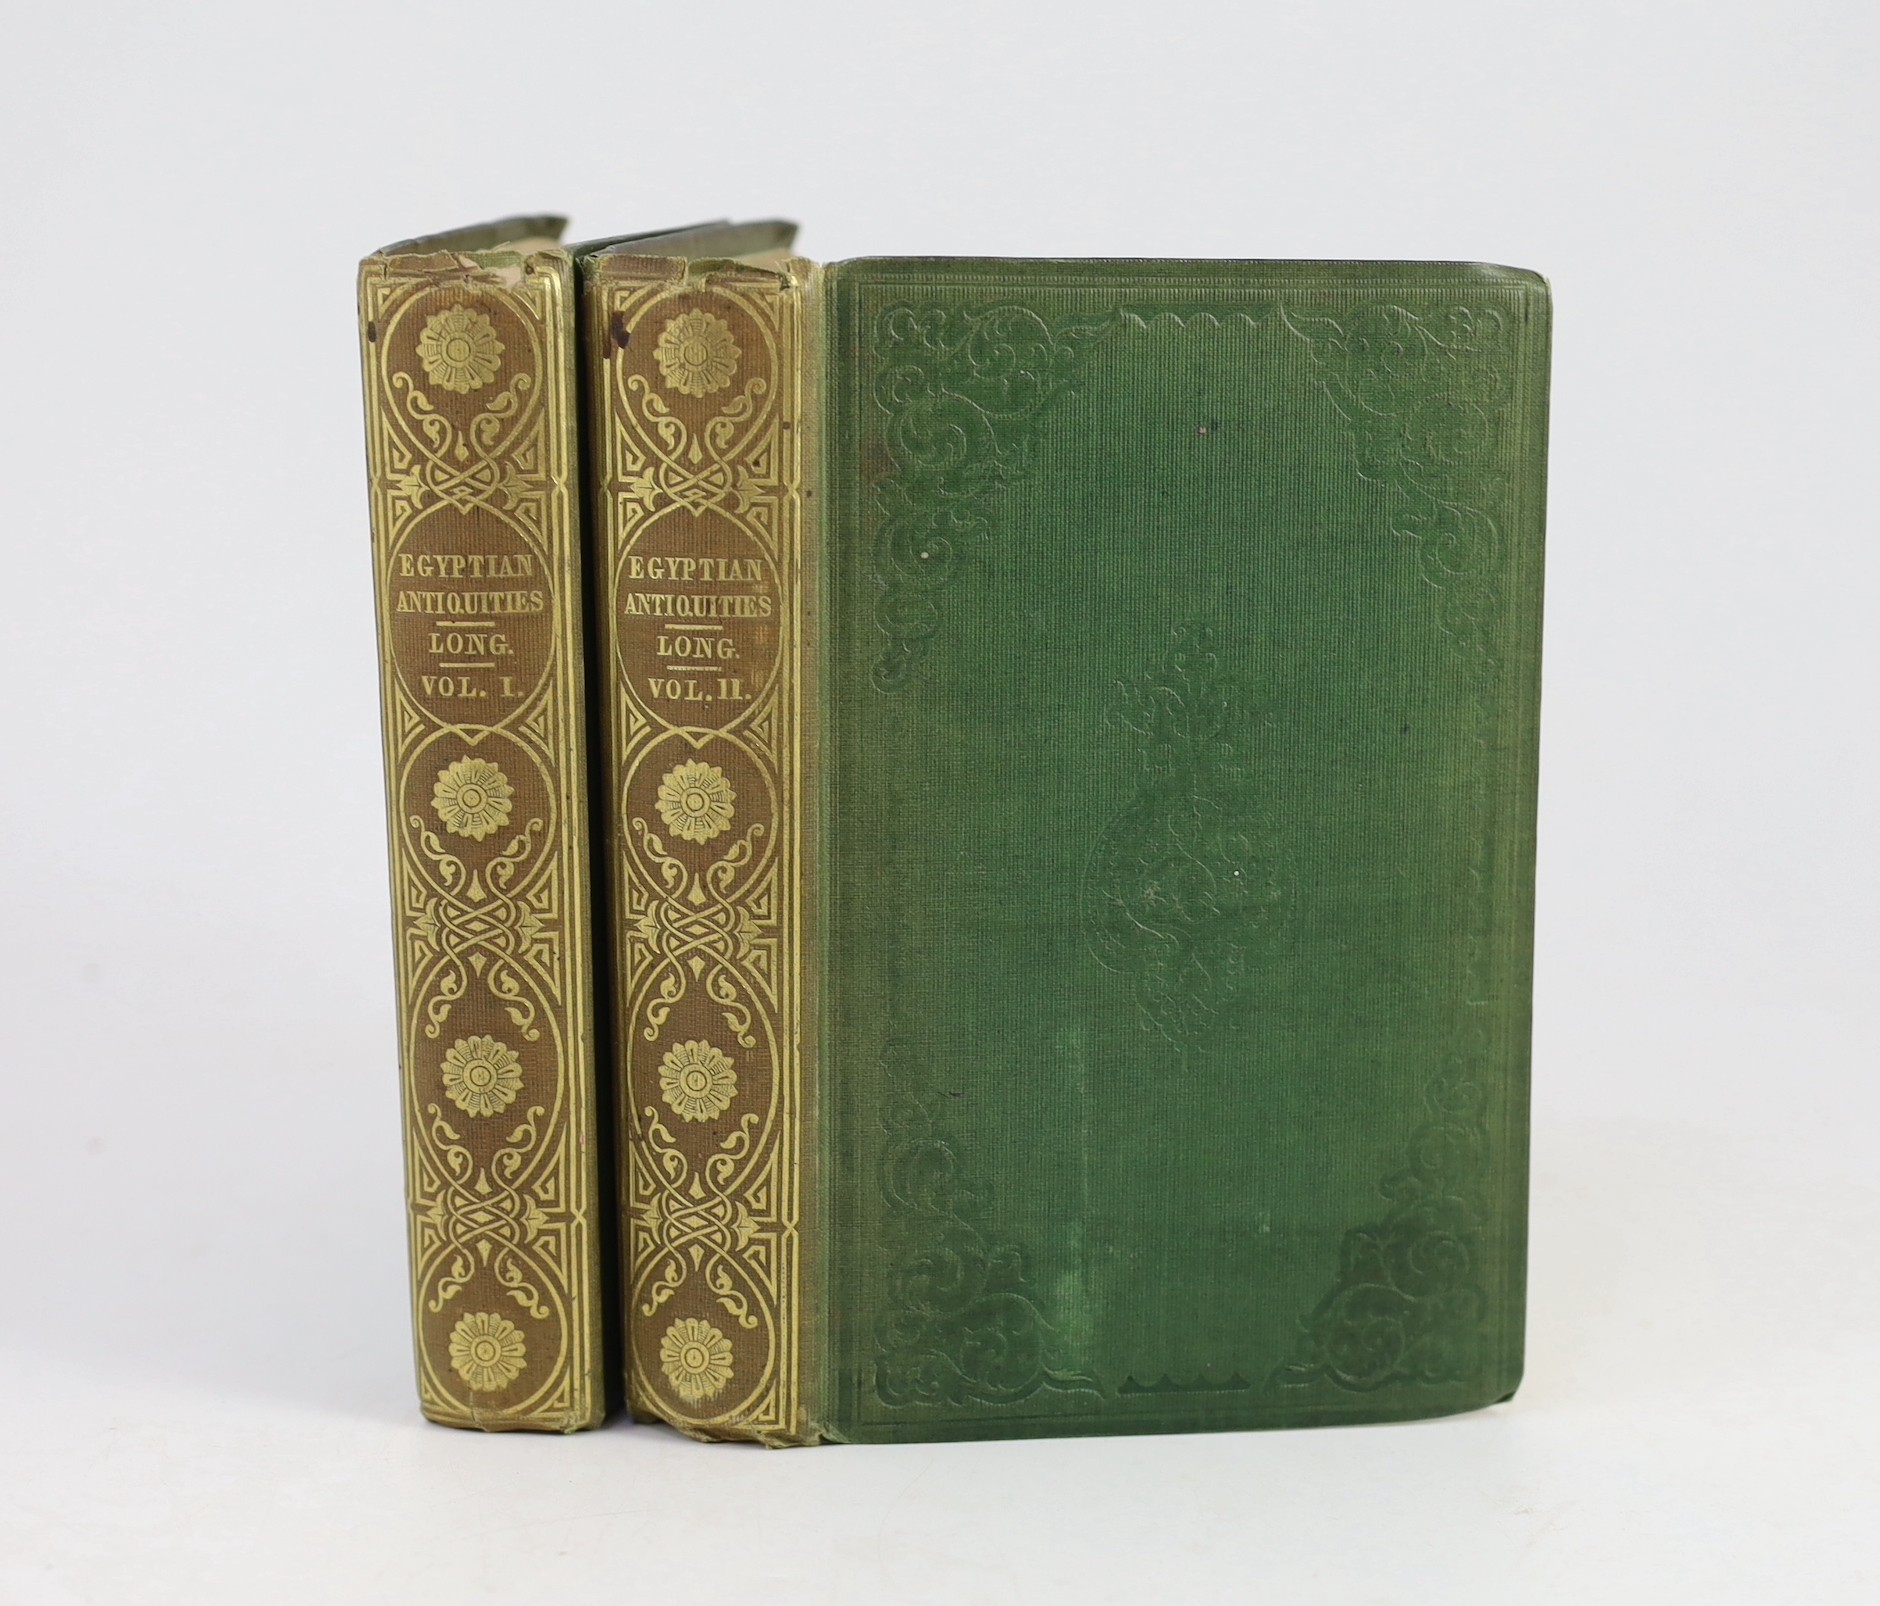 Long, George - The Egyptian Antiquities in the British Museum, 2 vols, 12mo, original green blind-stamped cloth, Nattali and Bond, London, 1846